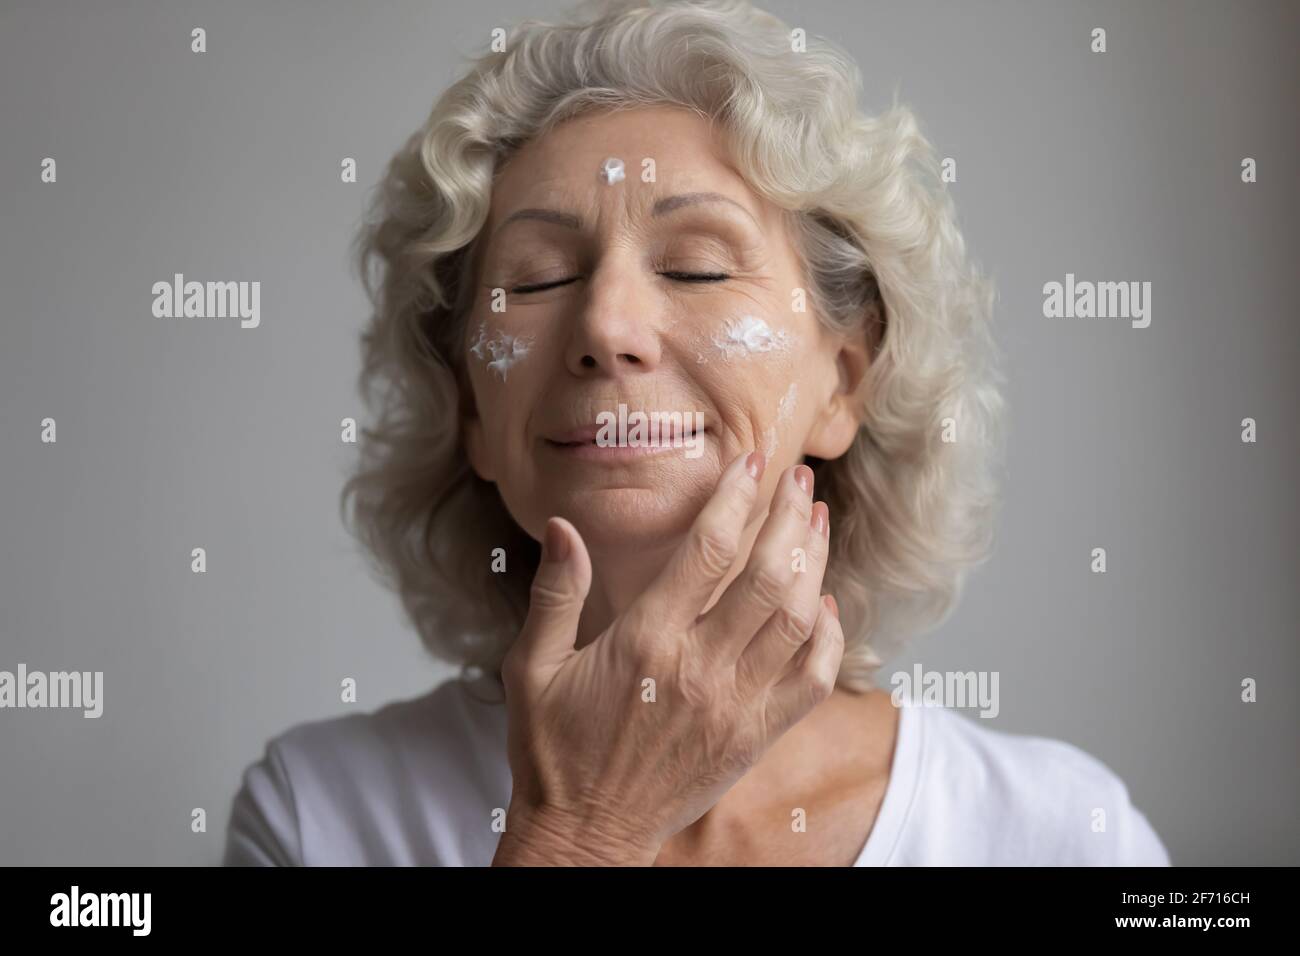 Relaxed elderly woman with closed eyes taking skincare treatment Stock Photo